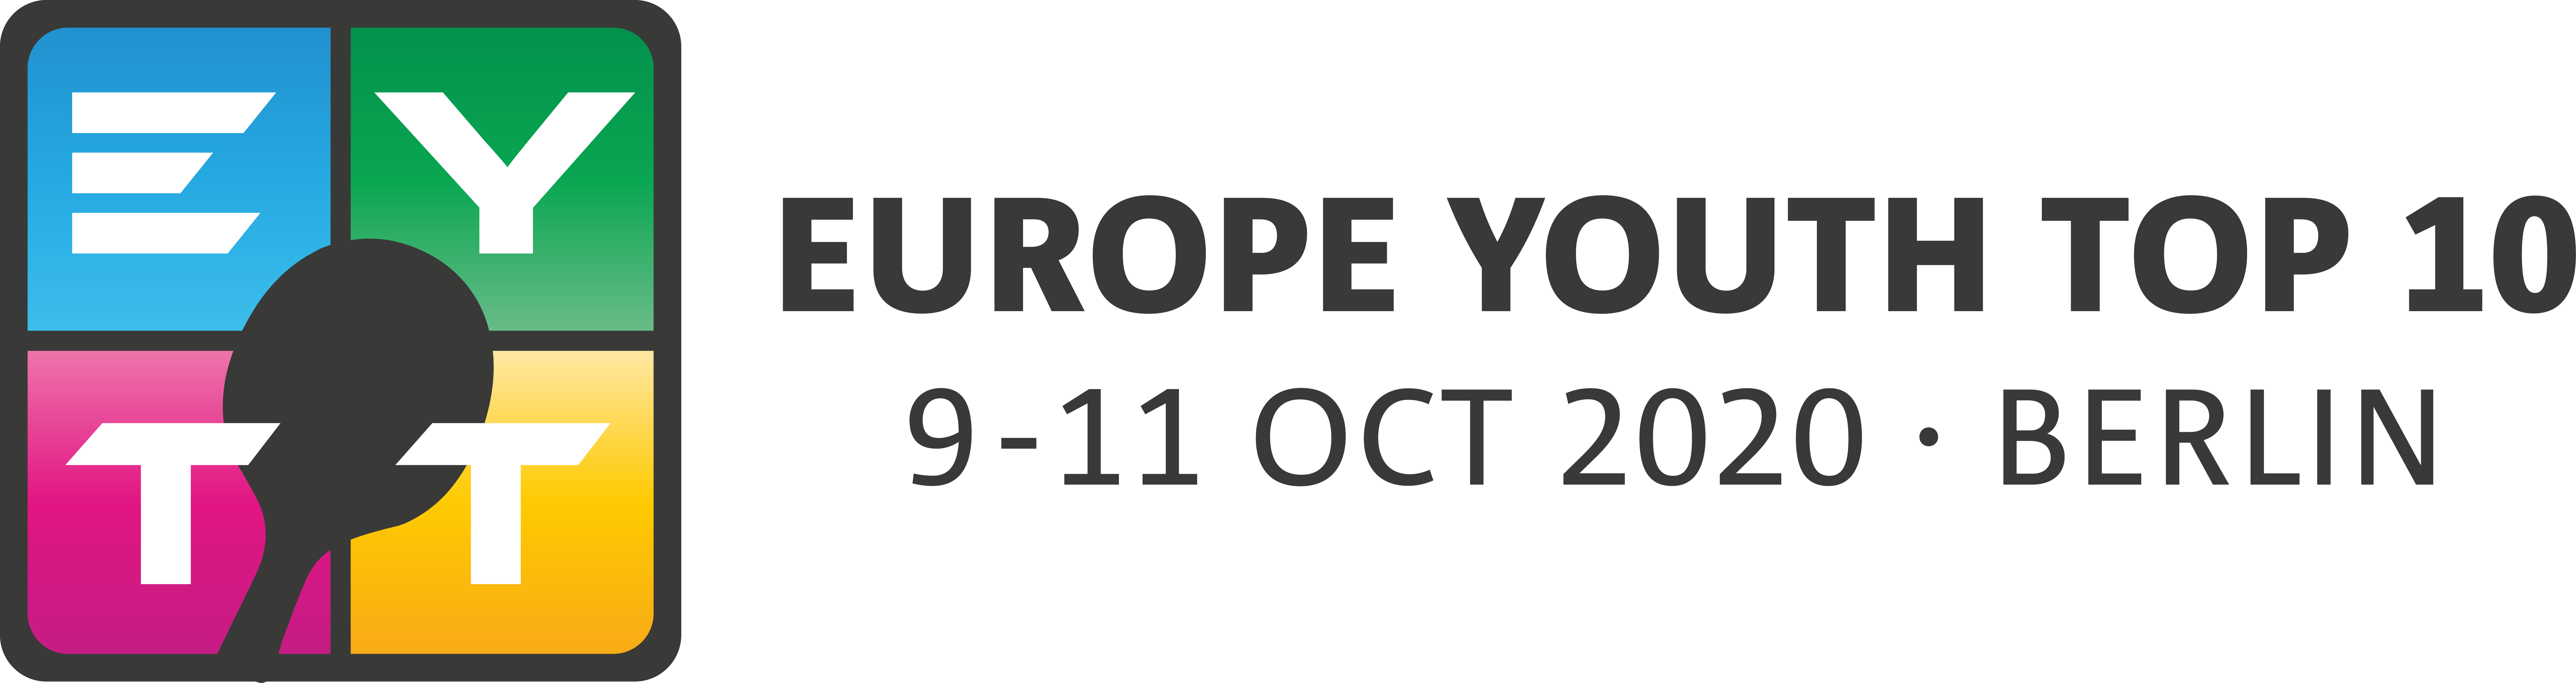 Europe Youth Top 10 vom 09.-11.10.2020 in Berlin